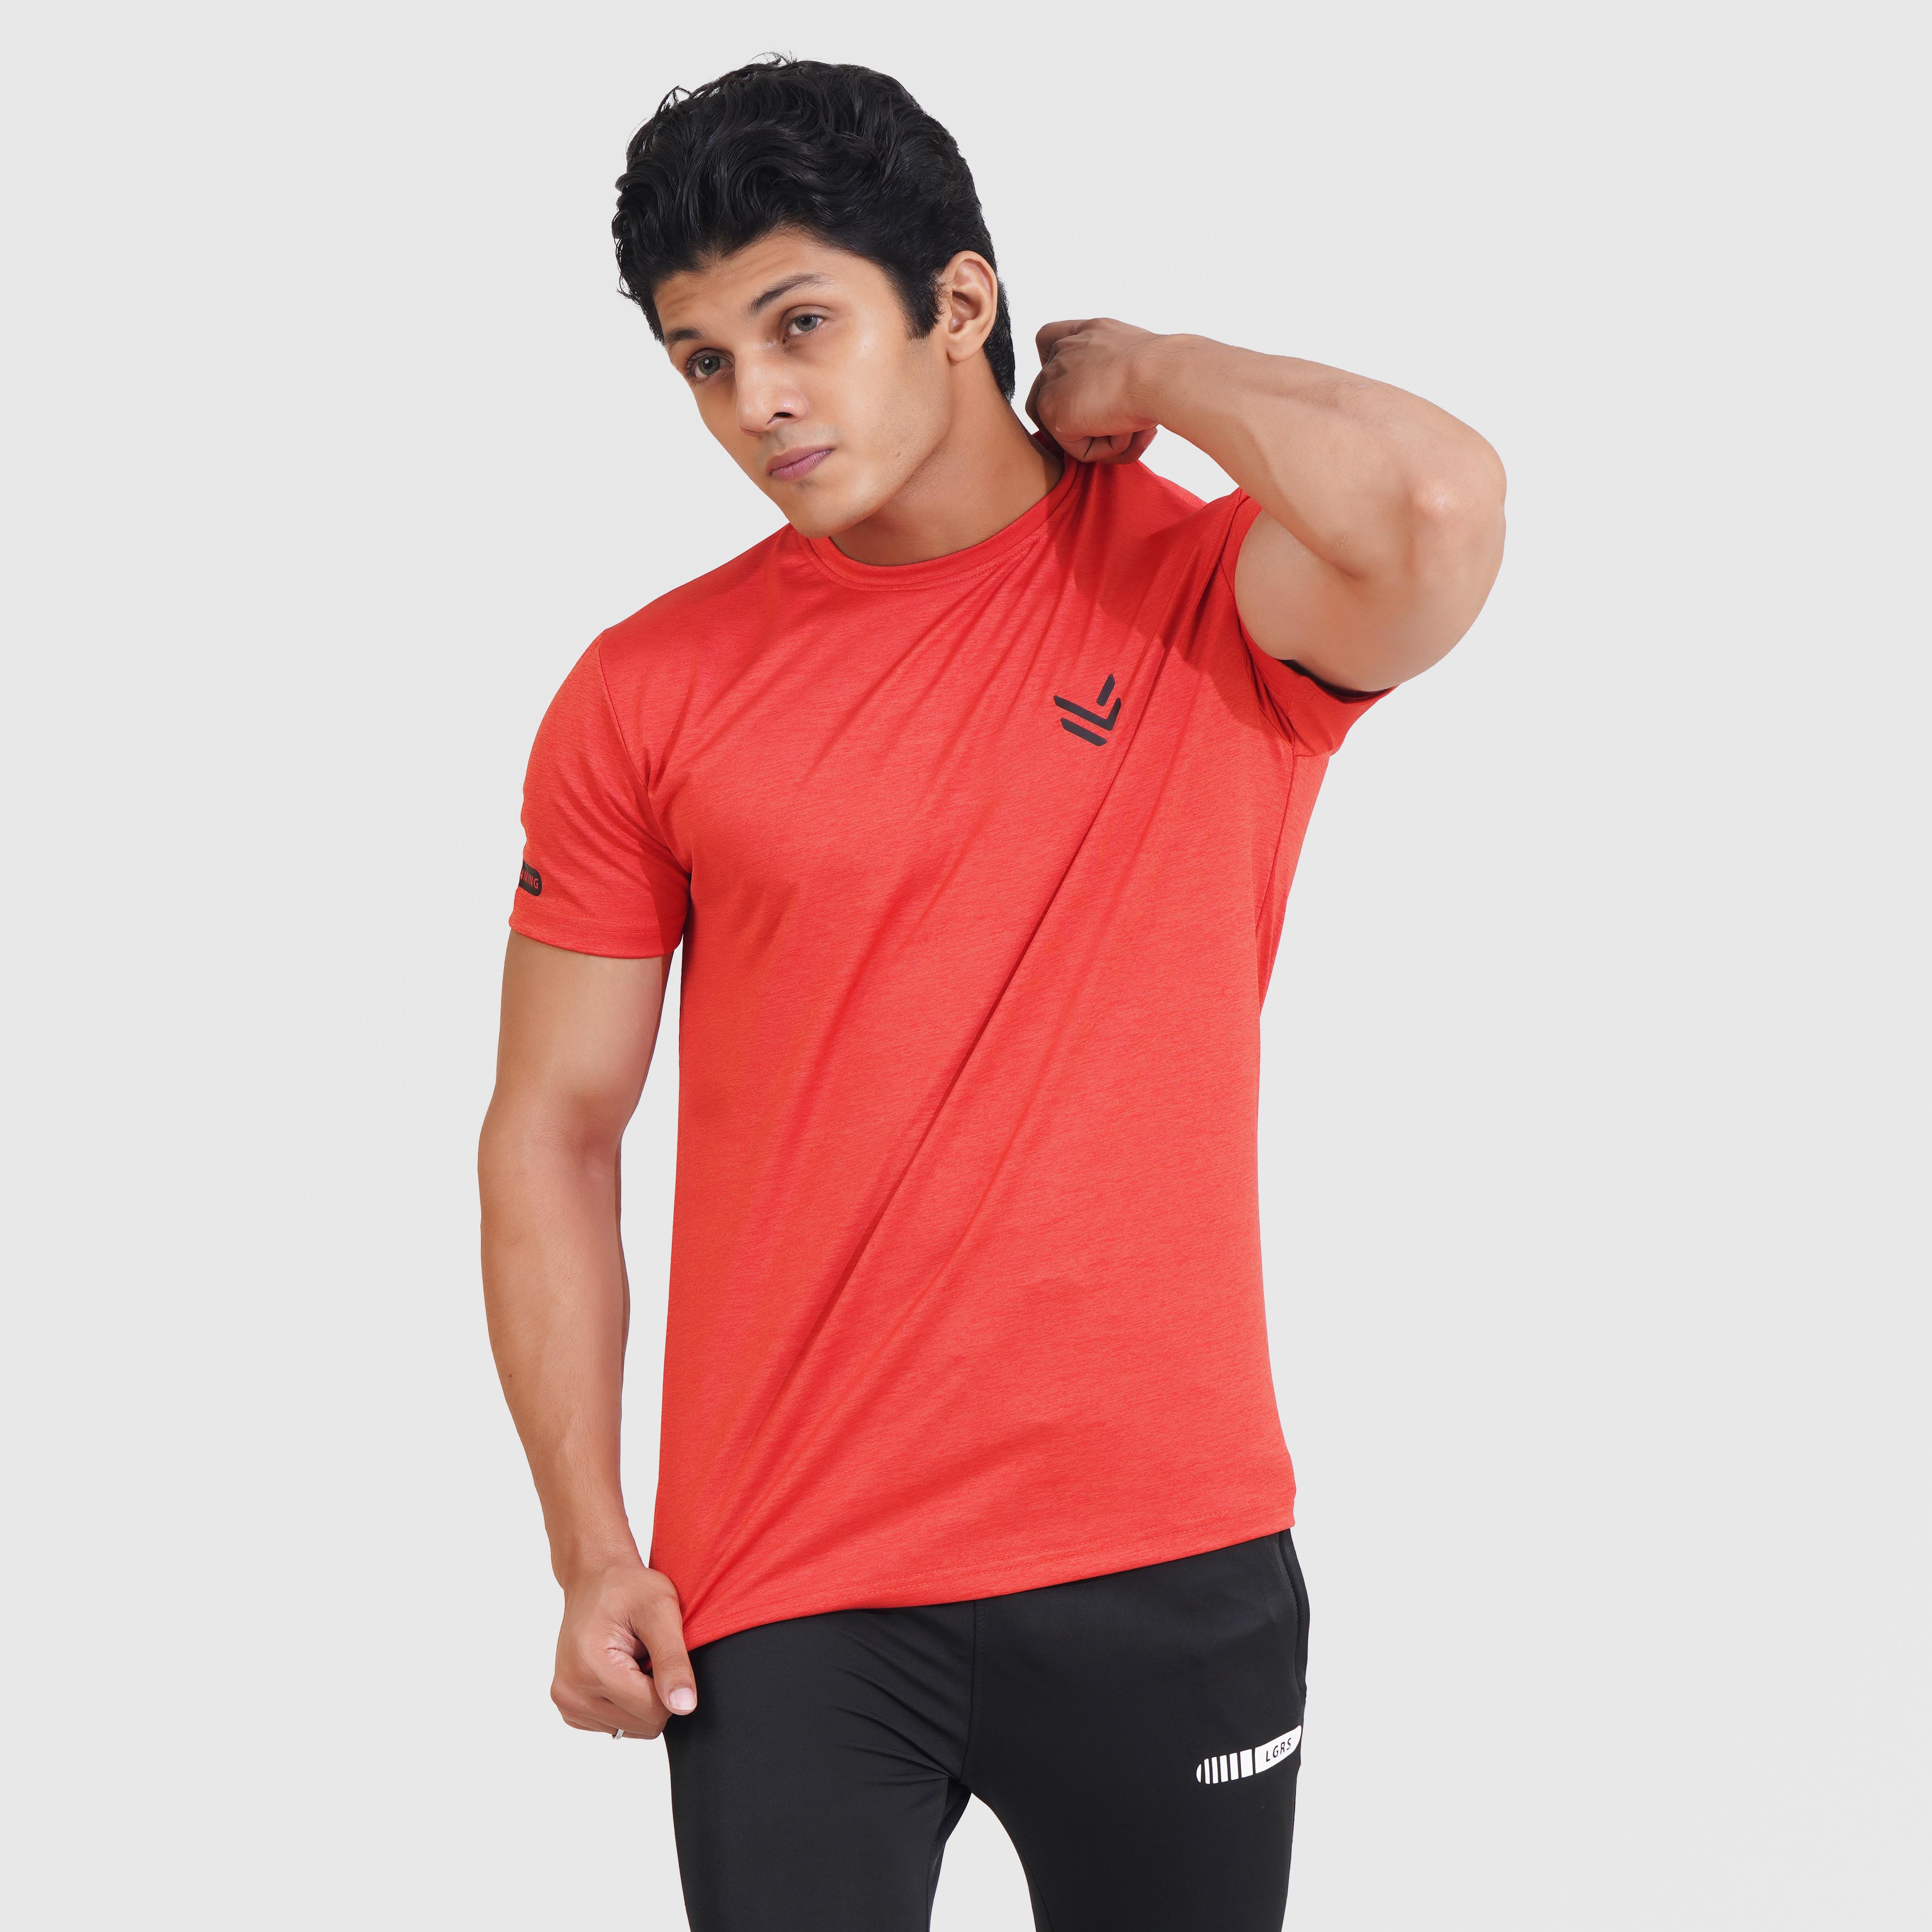 EliteFit FIRE Compression TEE